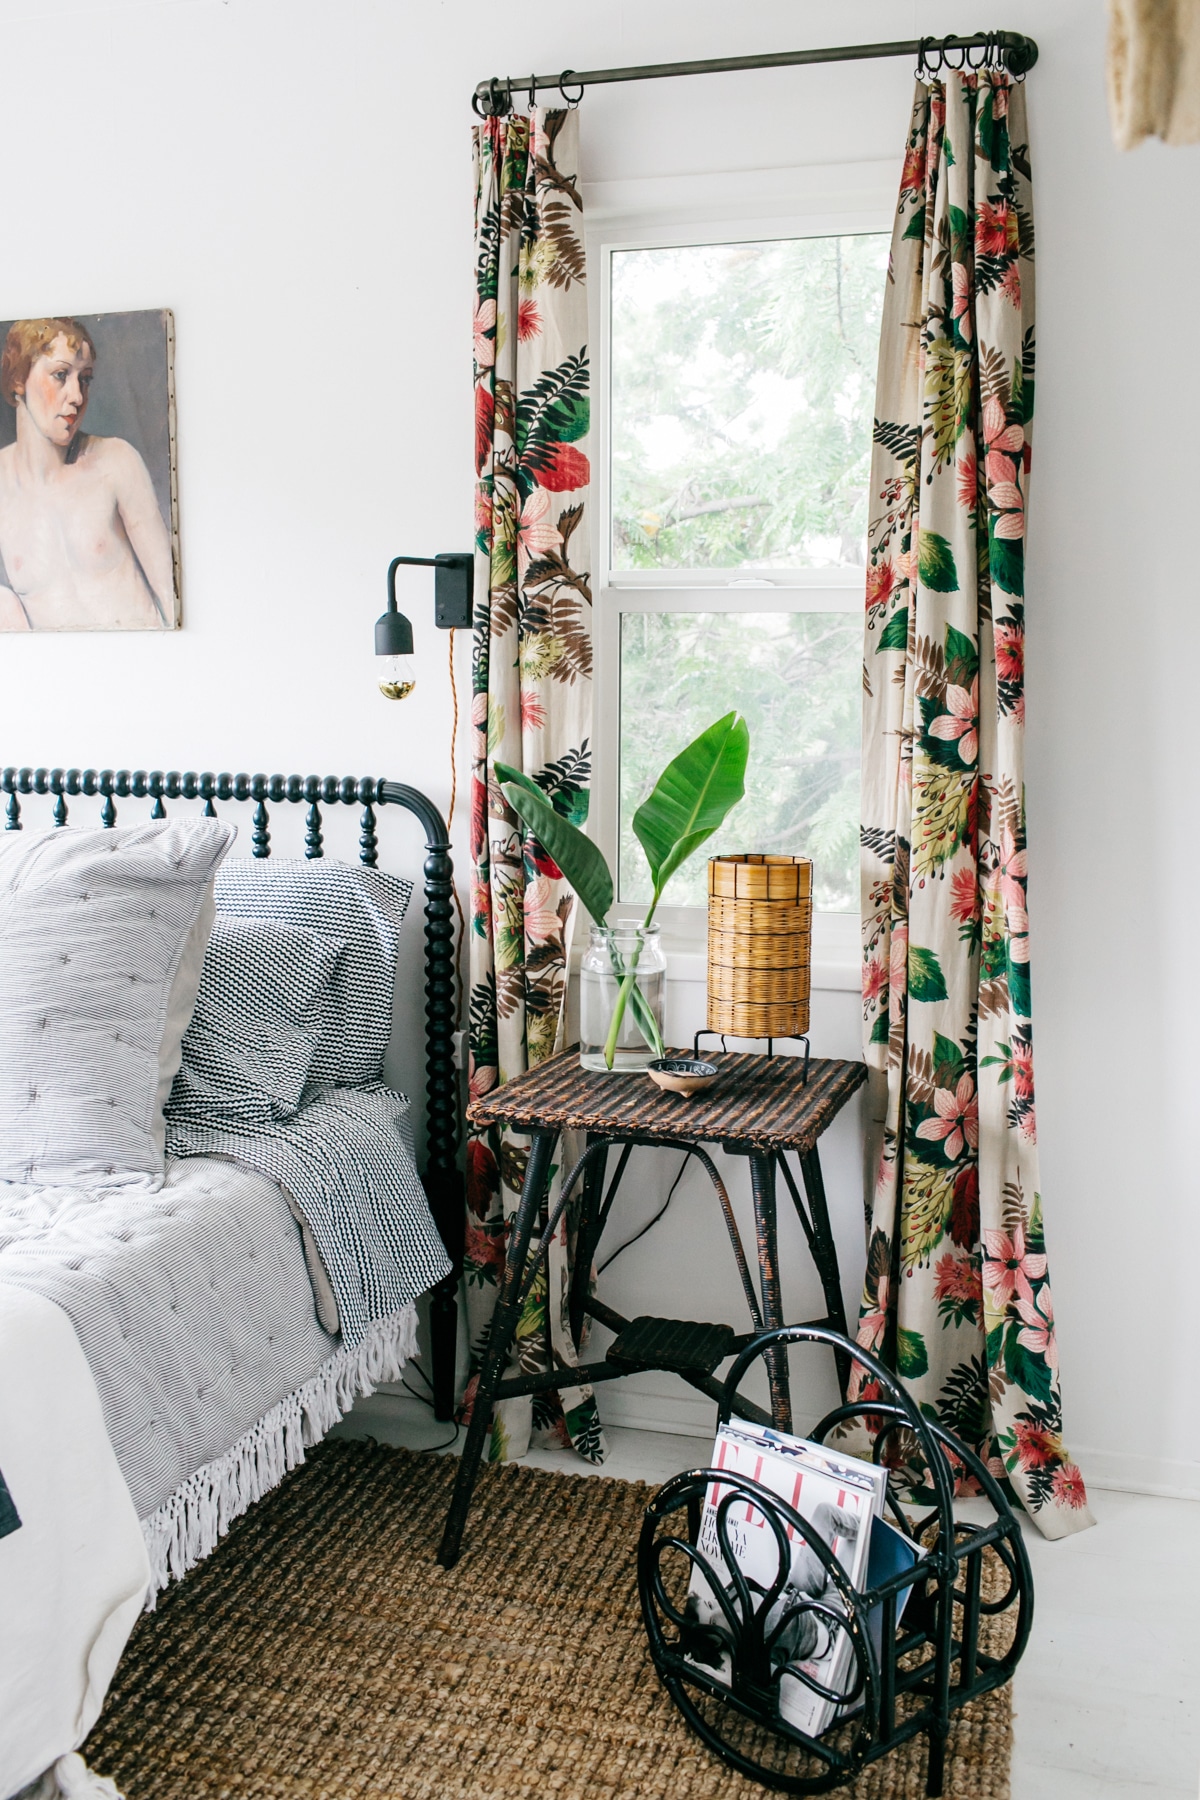 bark cloth tropical drapes in a black and white guest bedroom by SFgirlbybay | via coco kelley